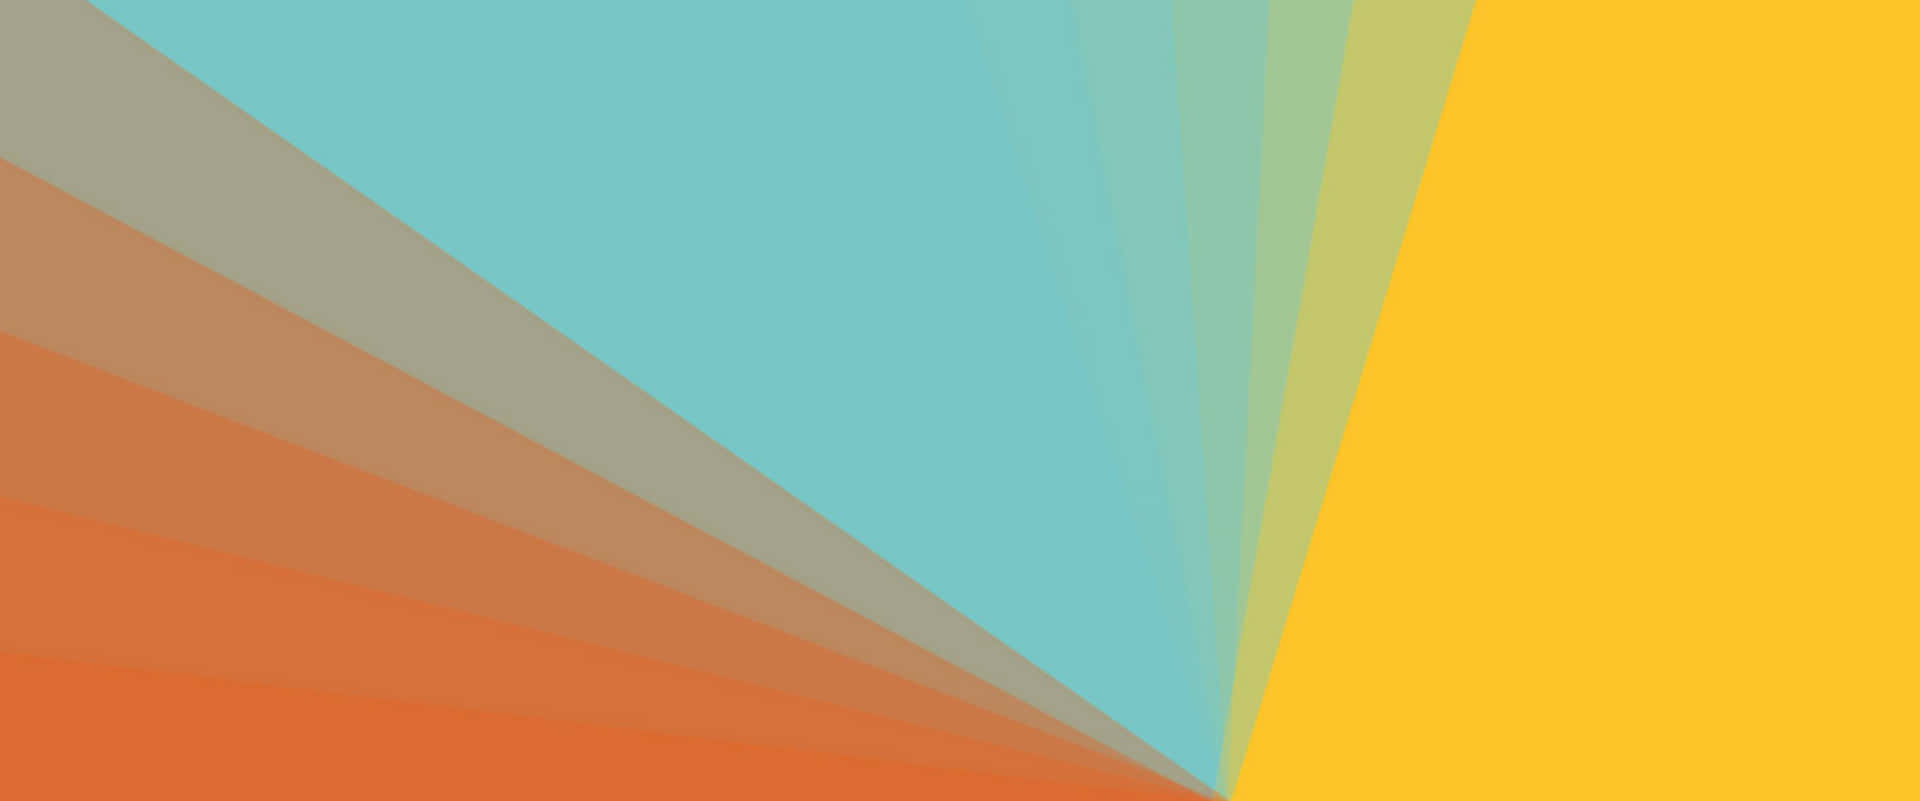 Rays In Yellow, Orange, And Teal Wallpaper